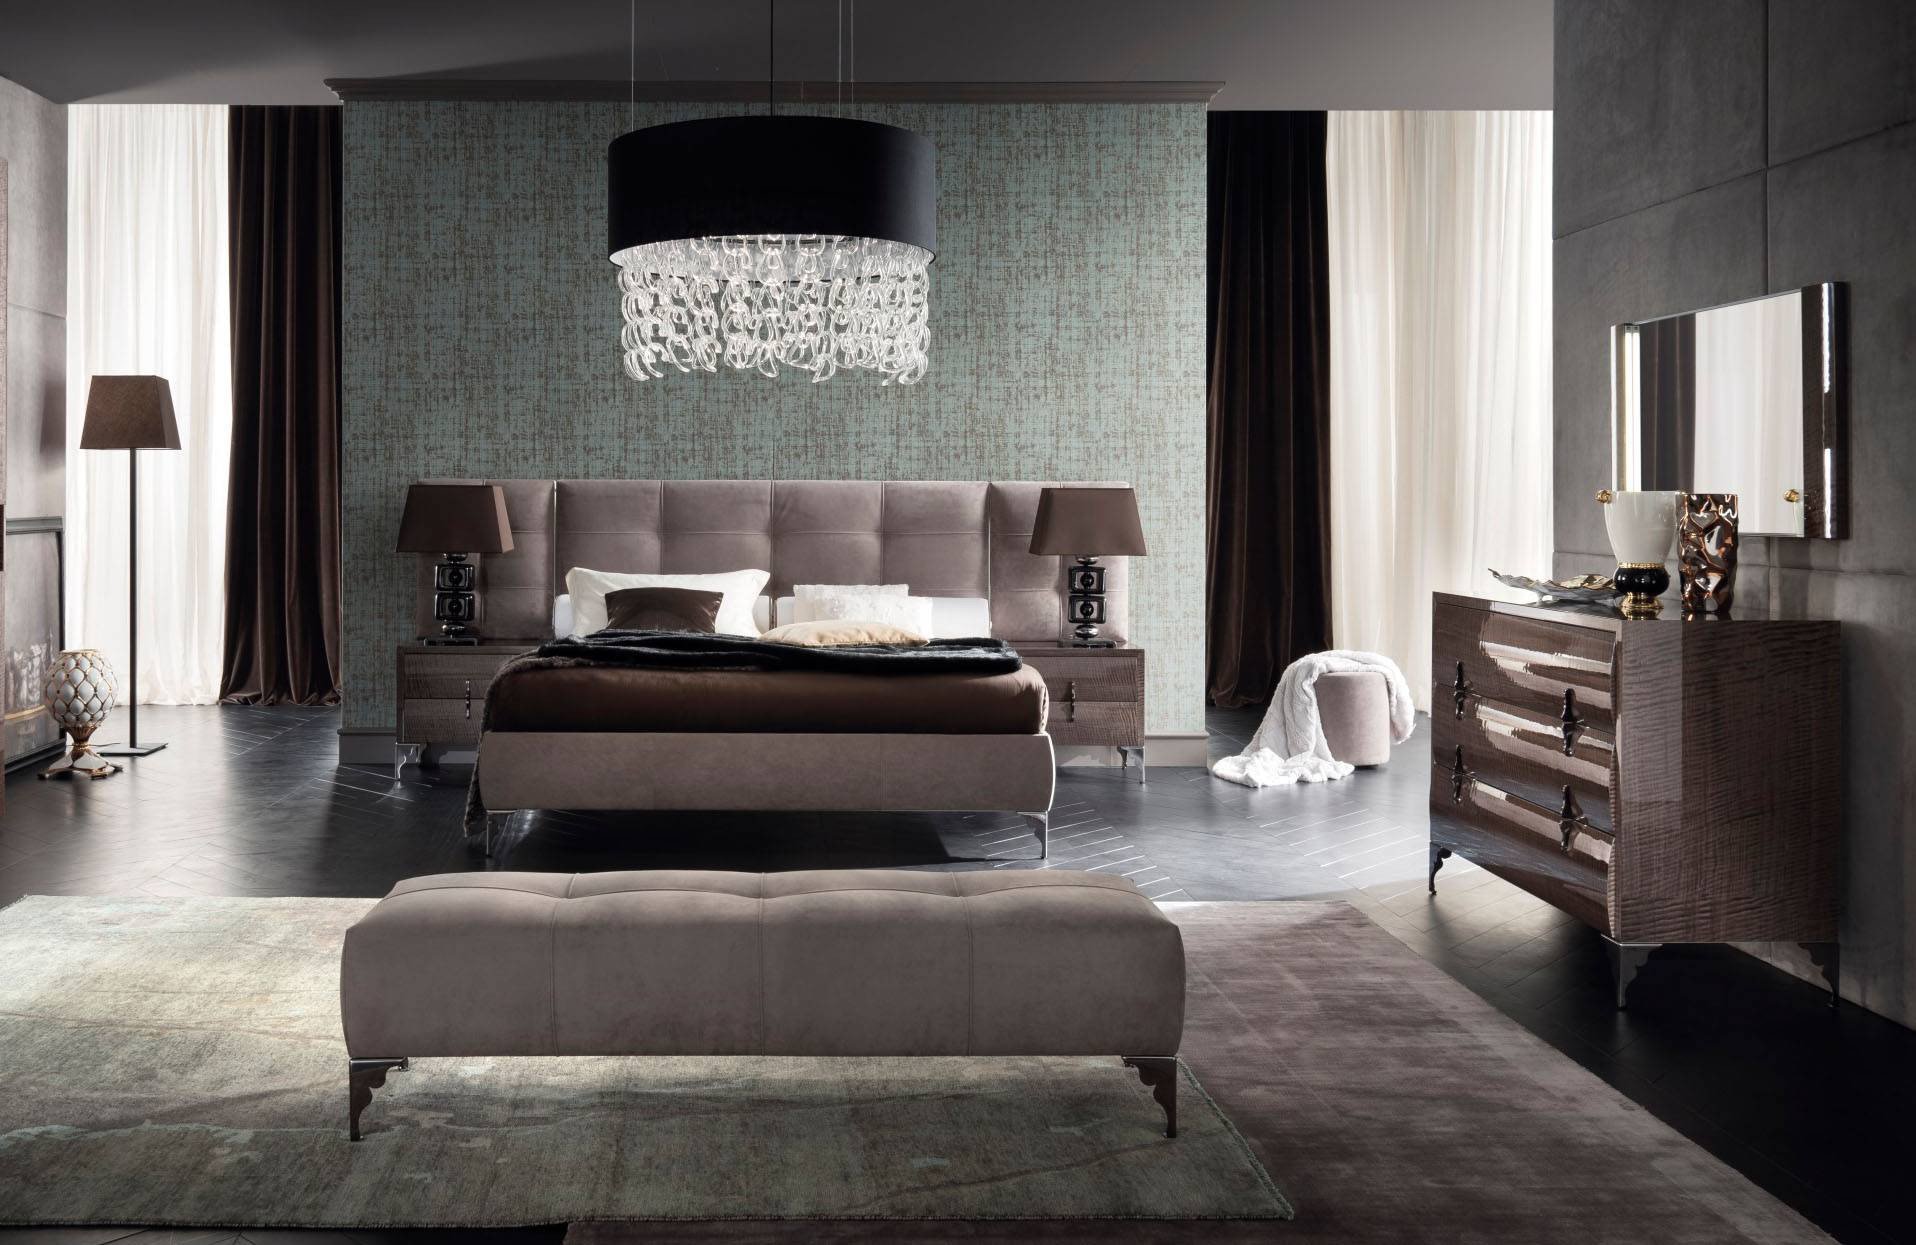 Modern Luxury Bedroom Furniture
 Made in Italy Leather Contemporary Master Bedroom Designs